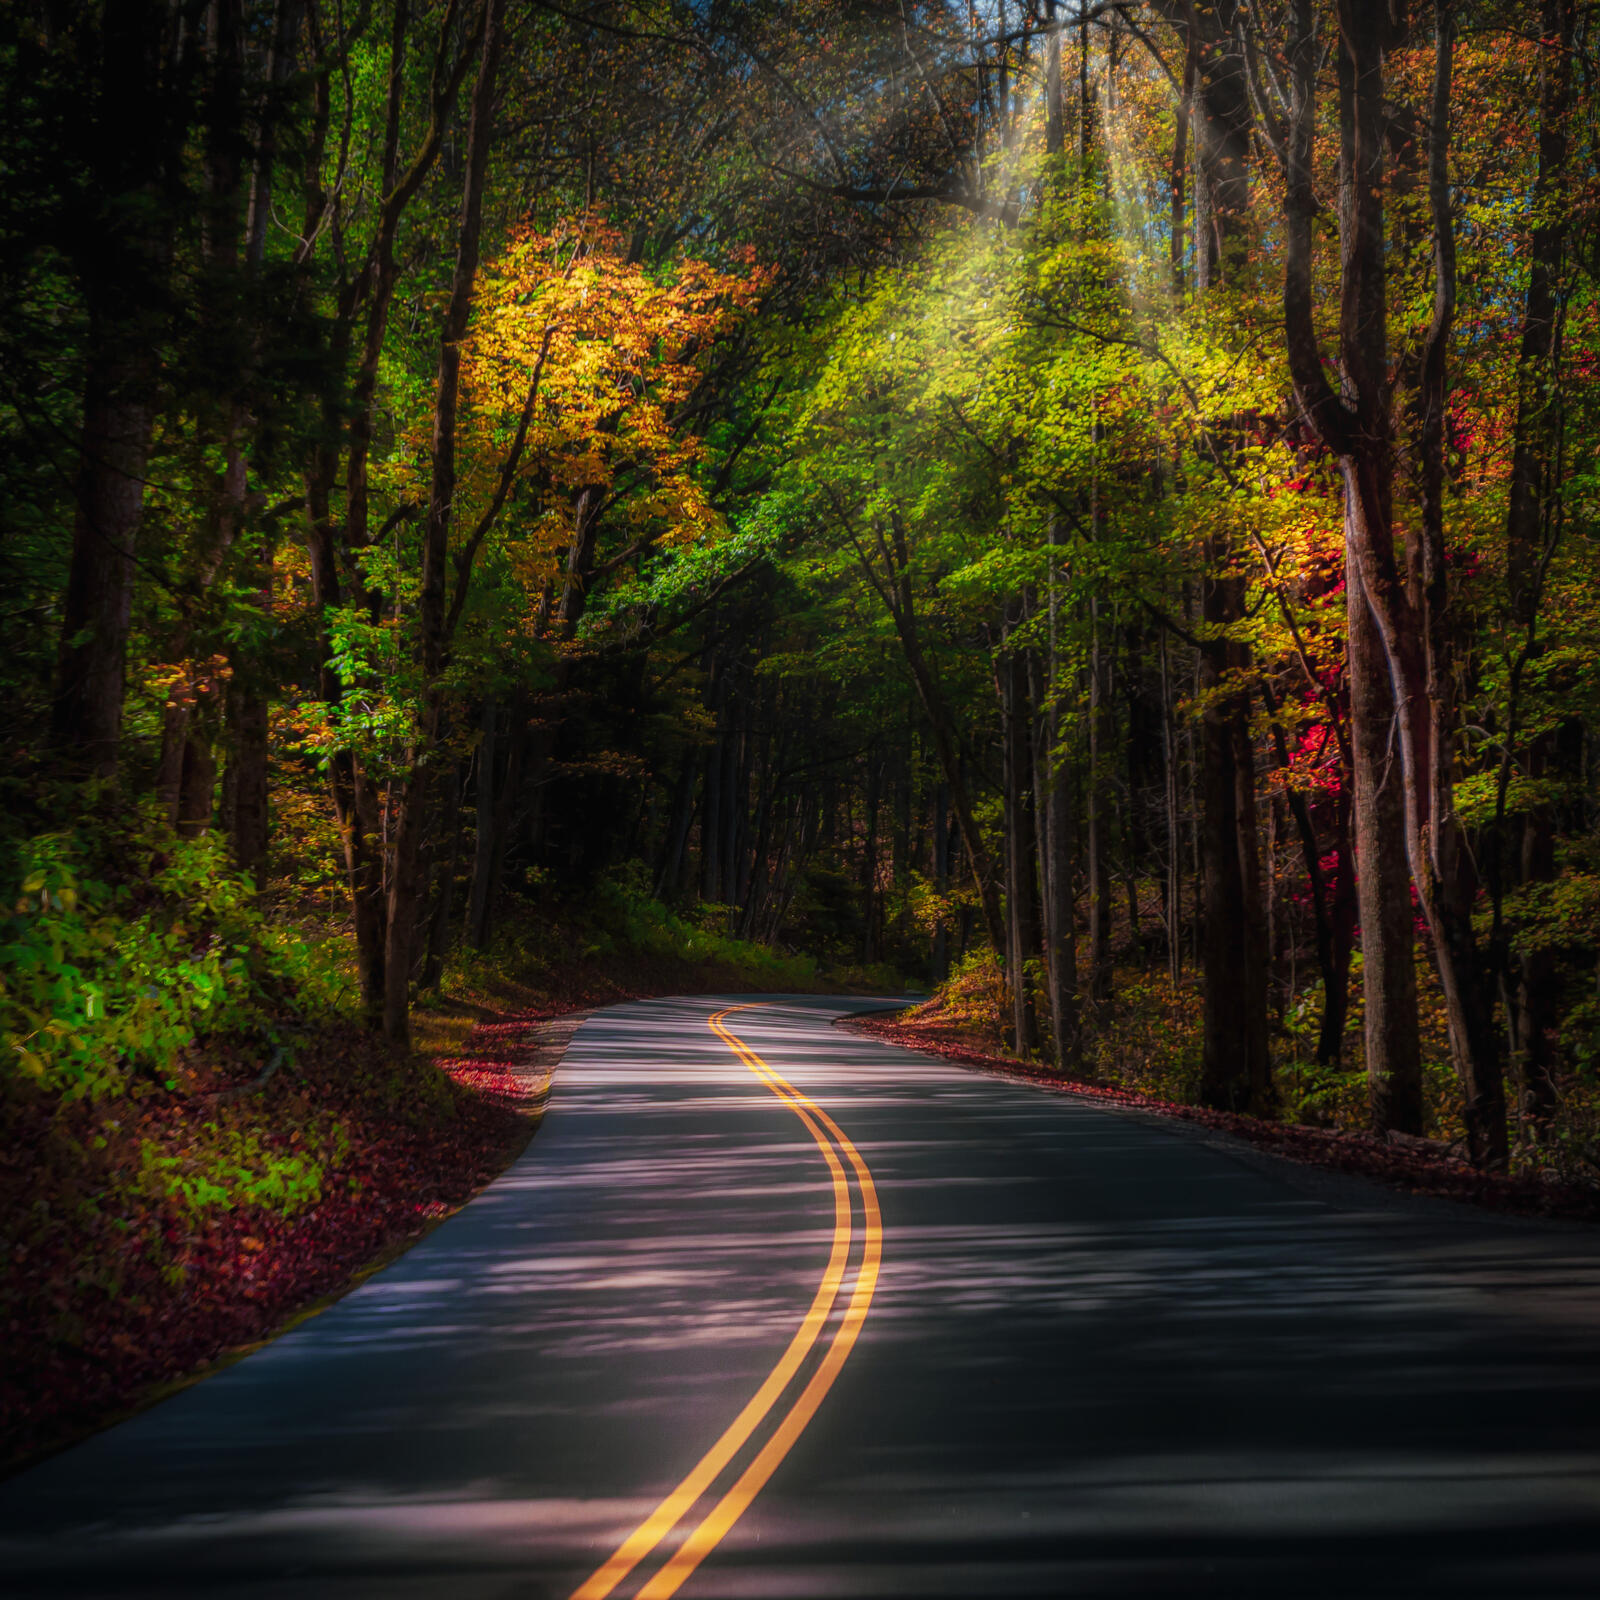 Free photo An asphalt road in a colorful autumn forest